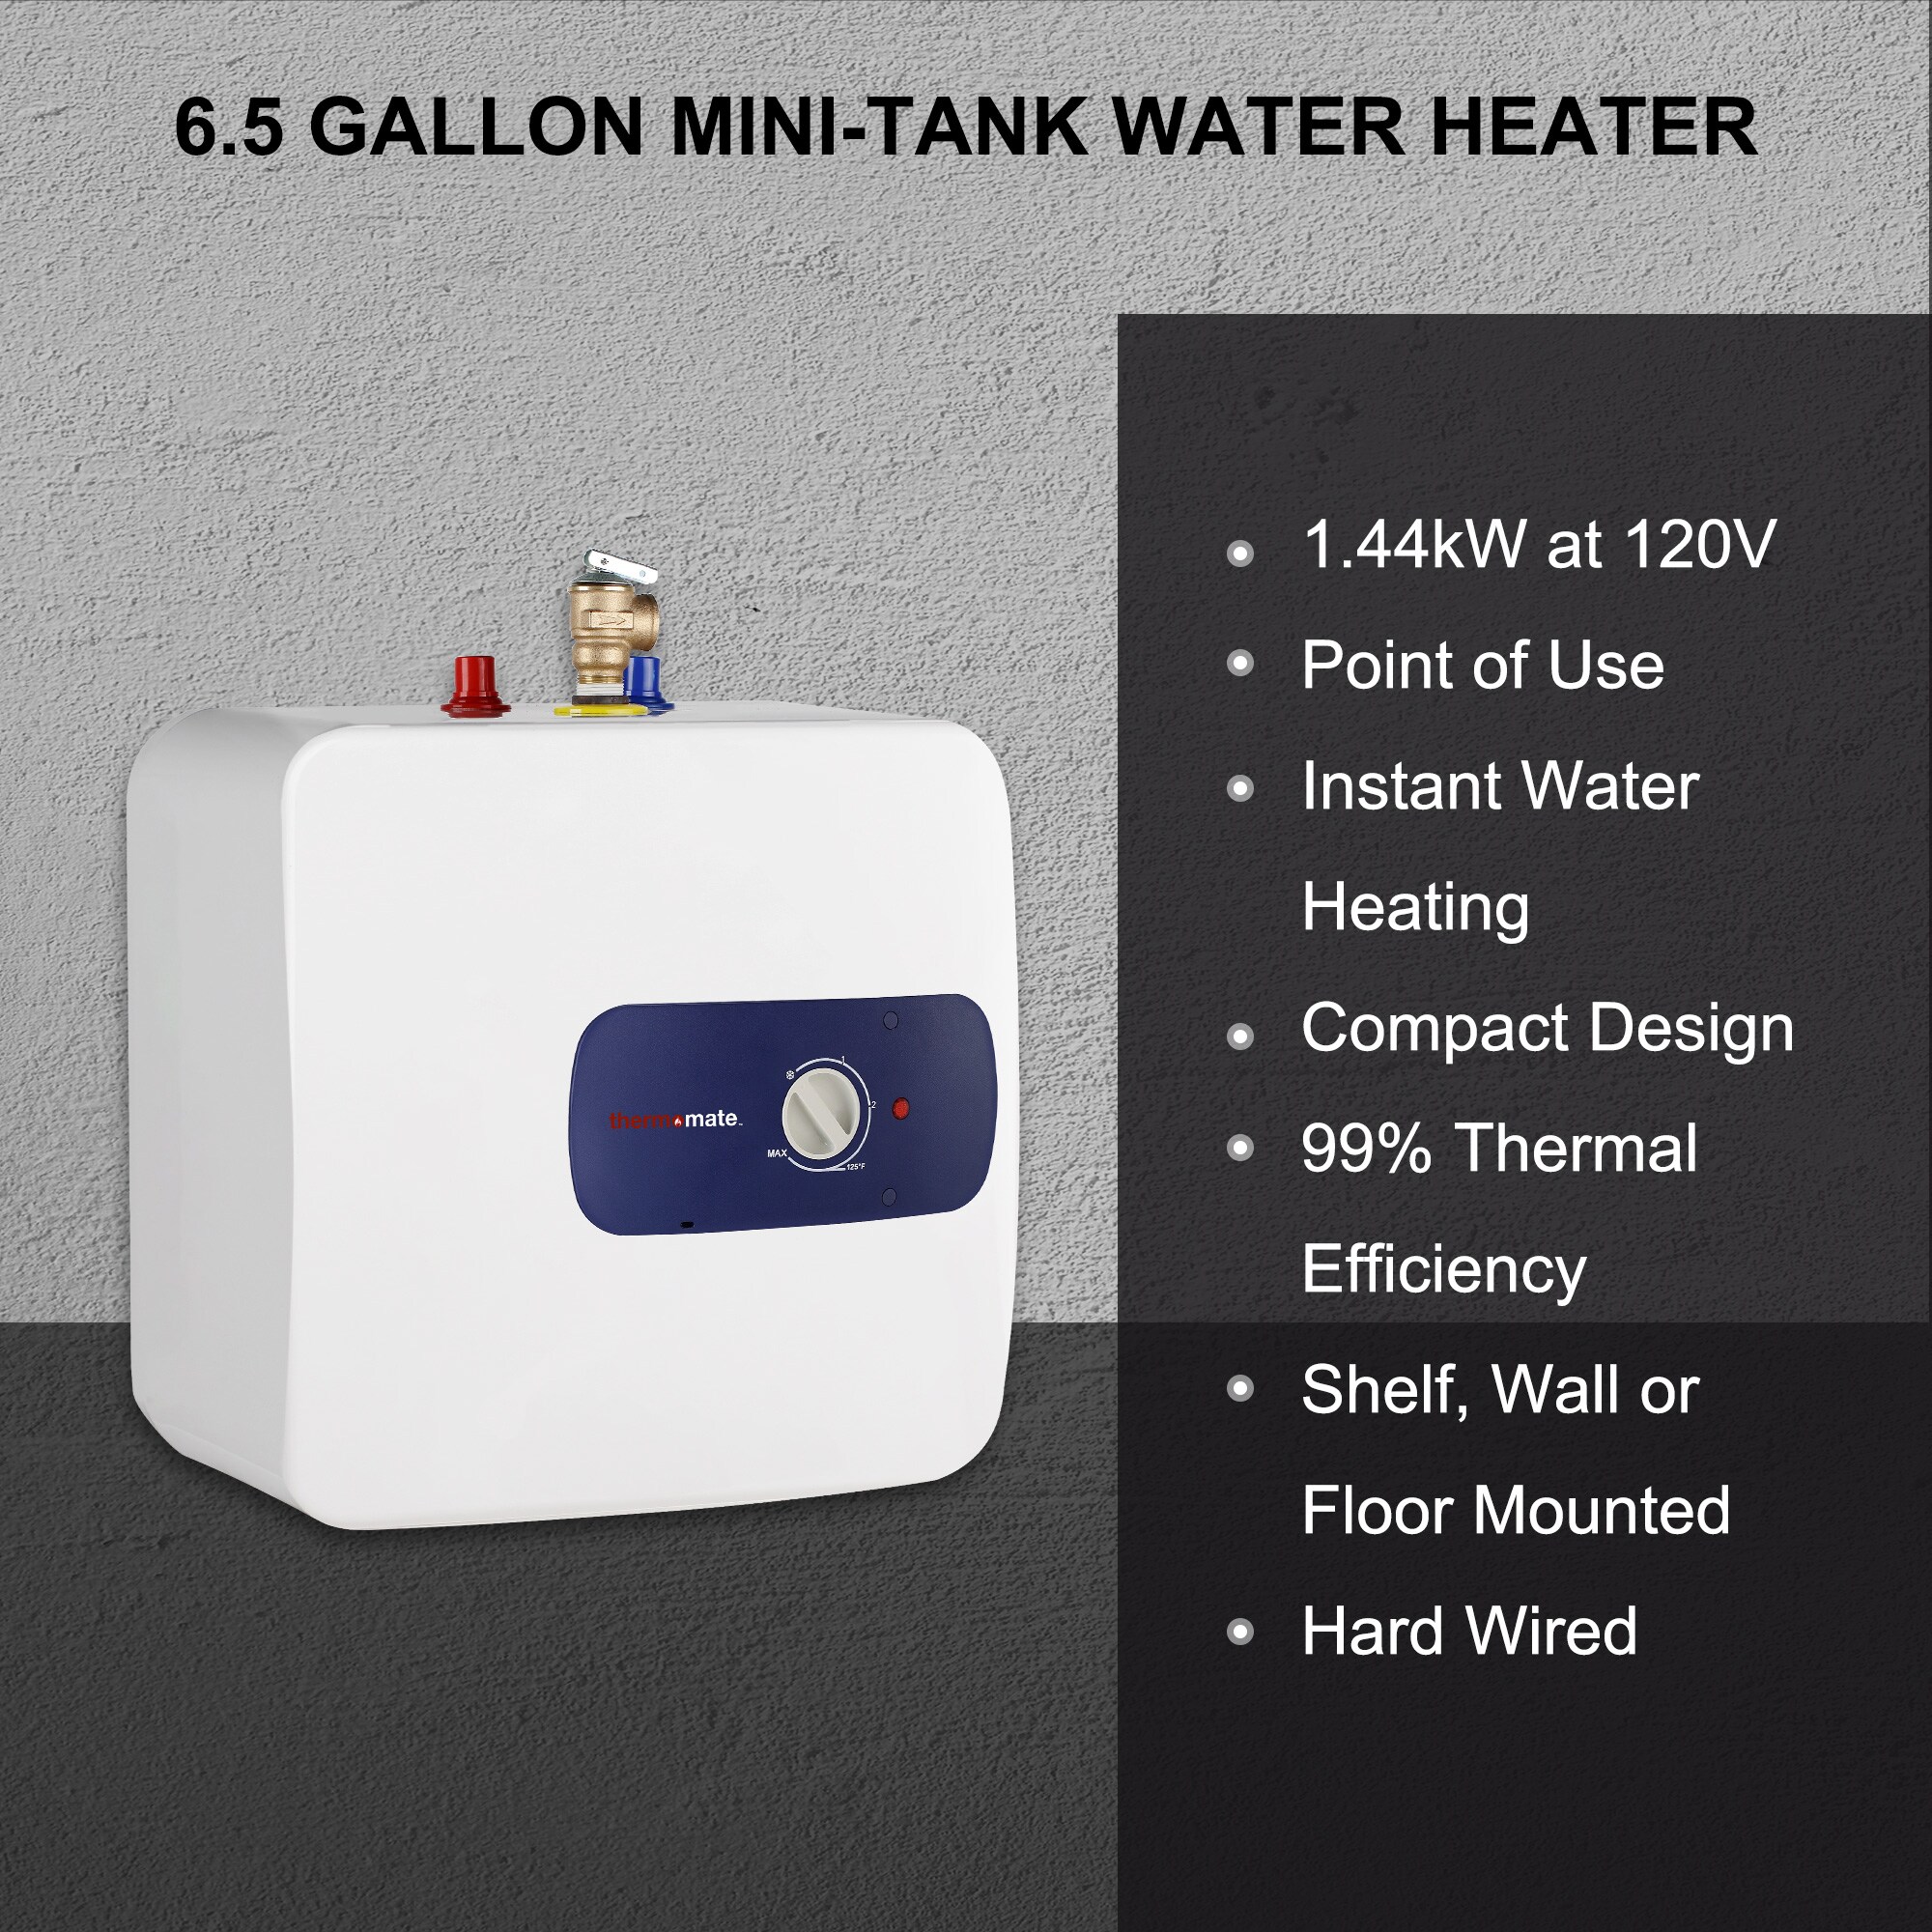 Camplux Electric Mini Tank Water Heater 120V 1.3 Gallon Under Sink Style  with Cord Plug 1.44kW